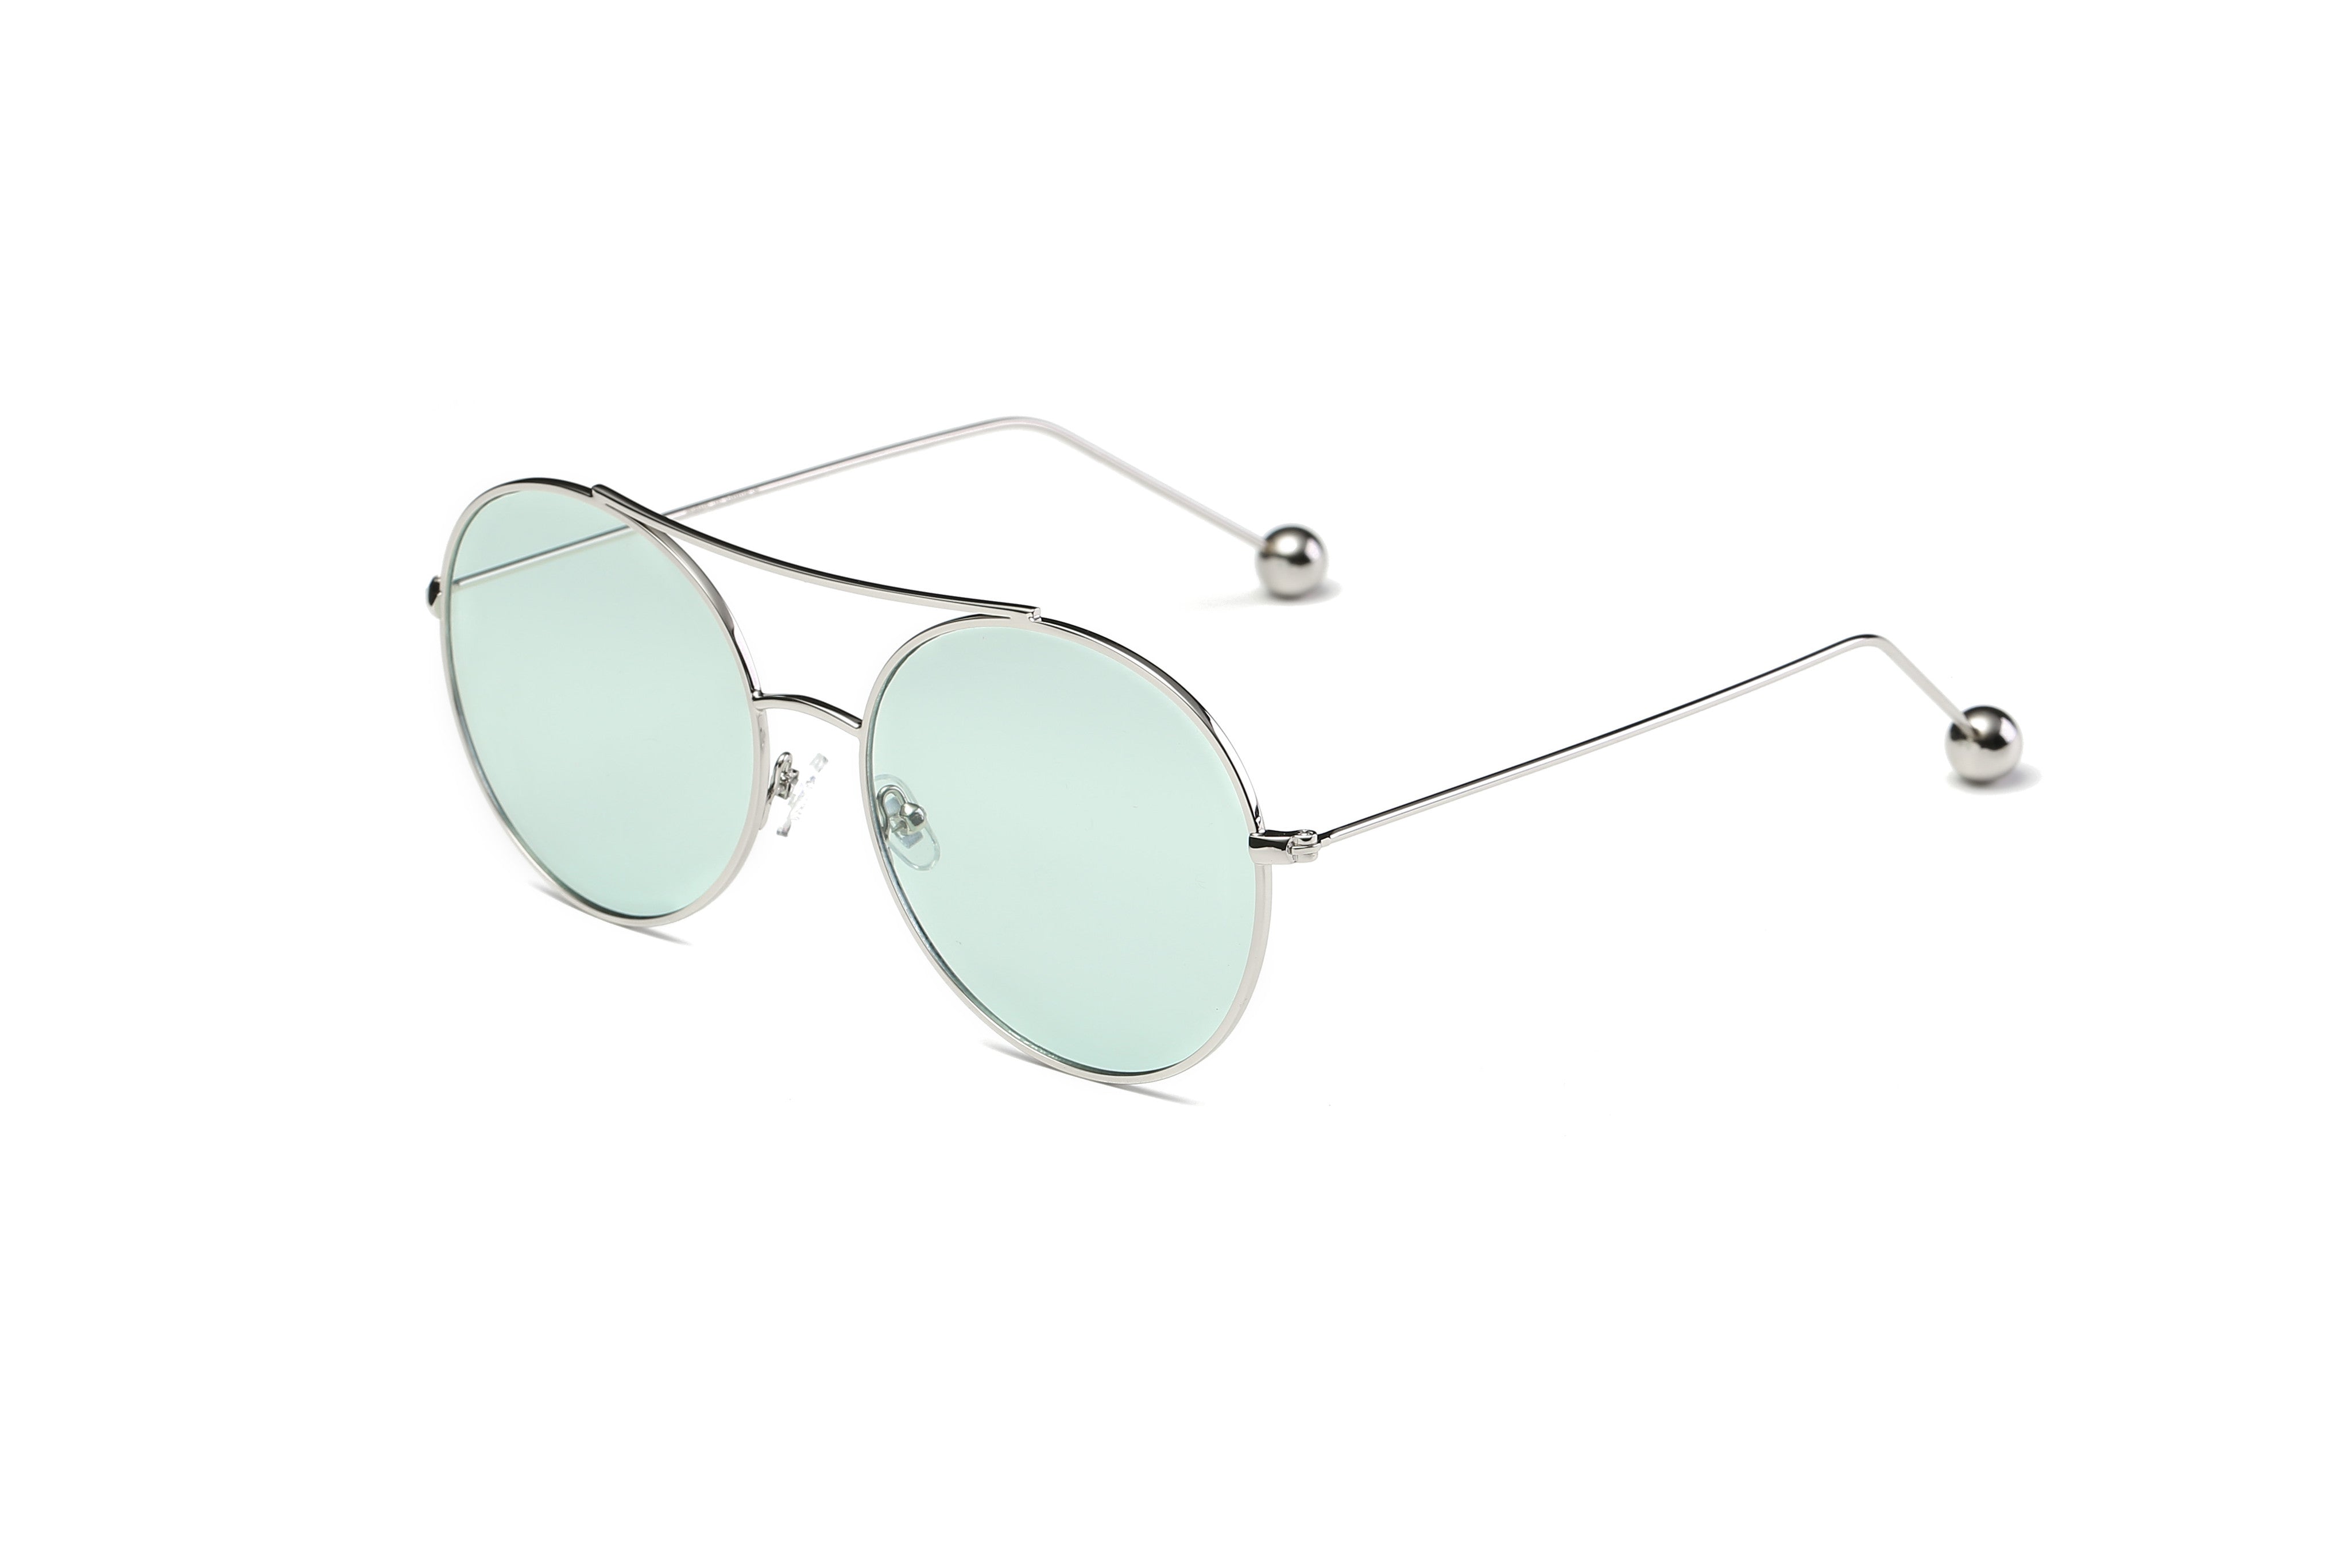 S1016 - Unisex Round Tinted Lens SUNGLASSES Green lens with silver frame